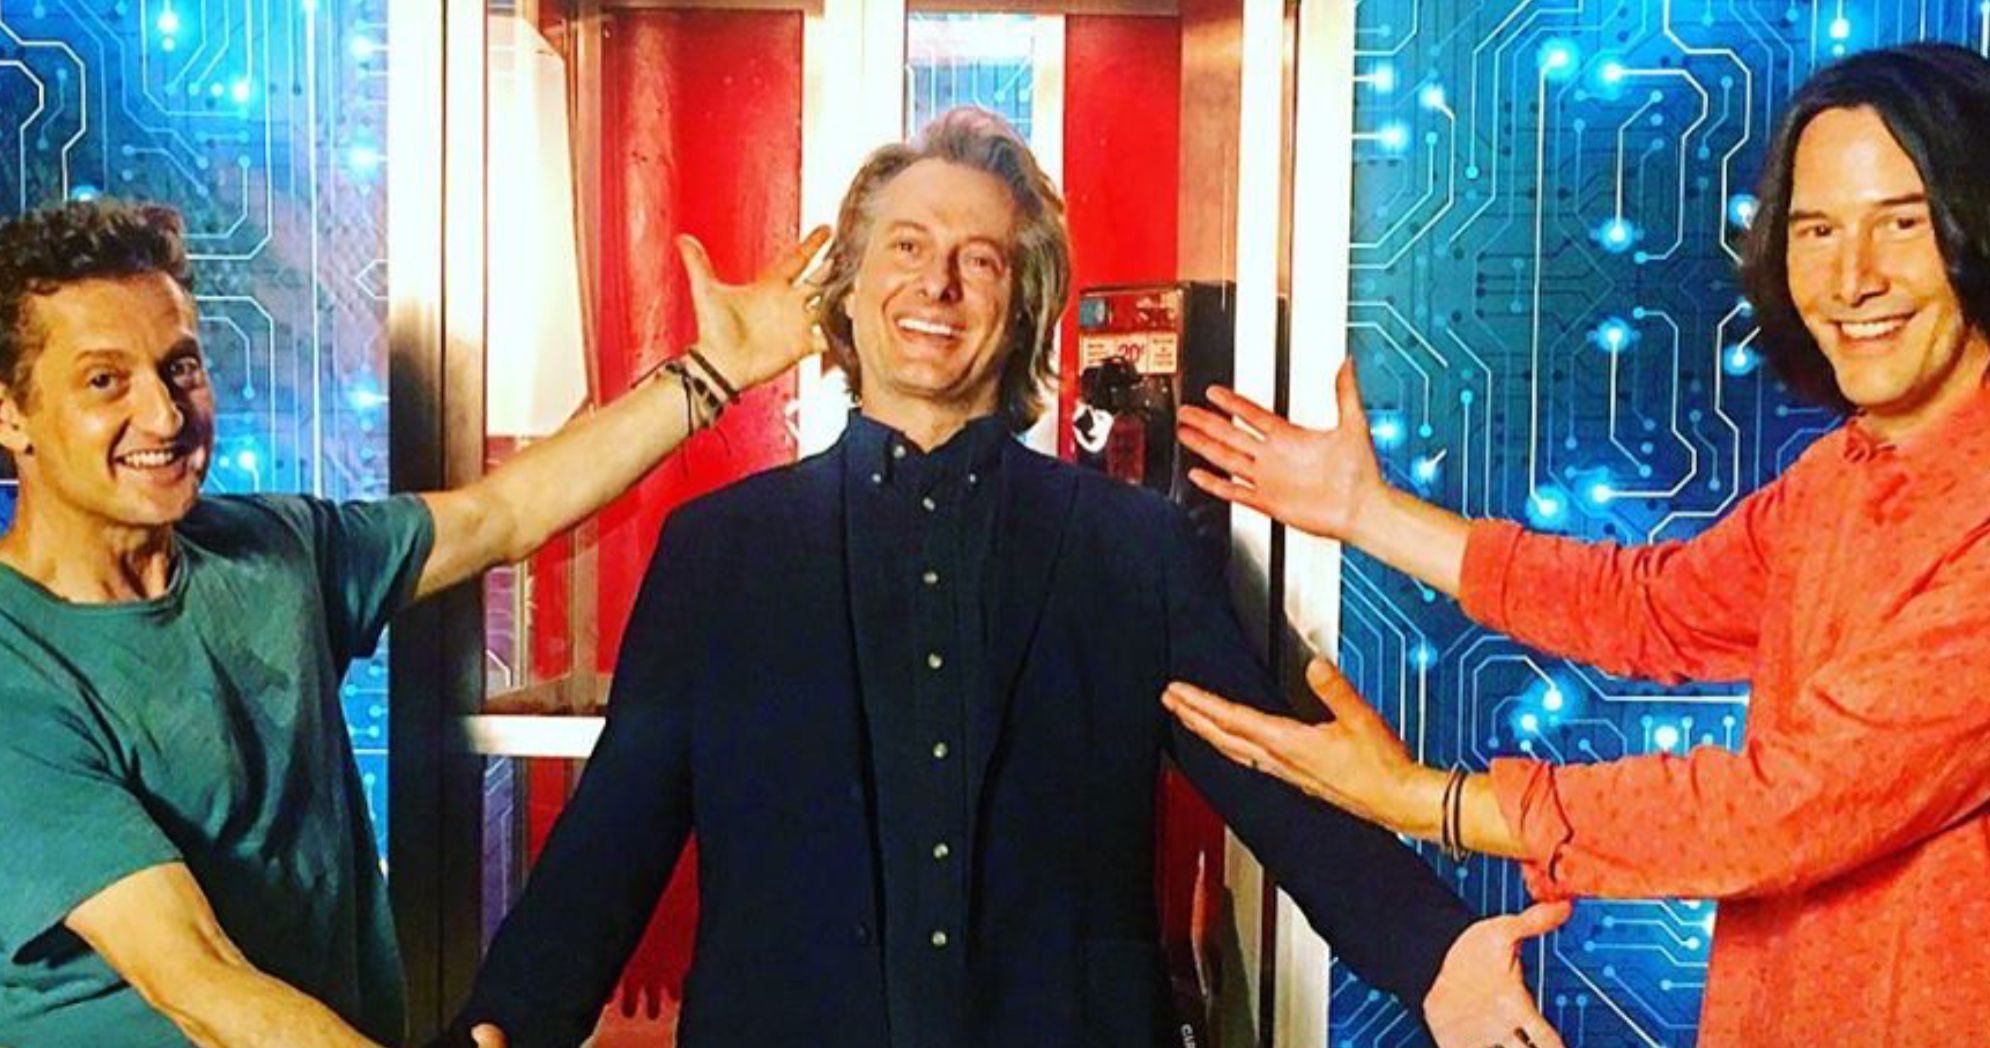 Bill &amp; Ted 3 Photo Reunites Keanu Reeves and Alex Winter in the Circuits of Time